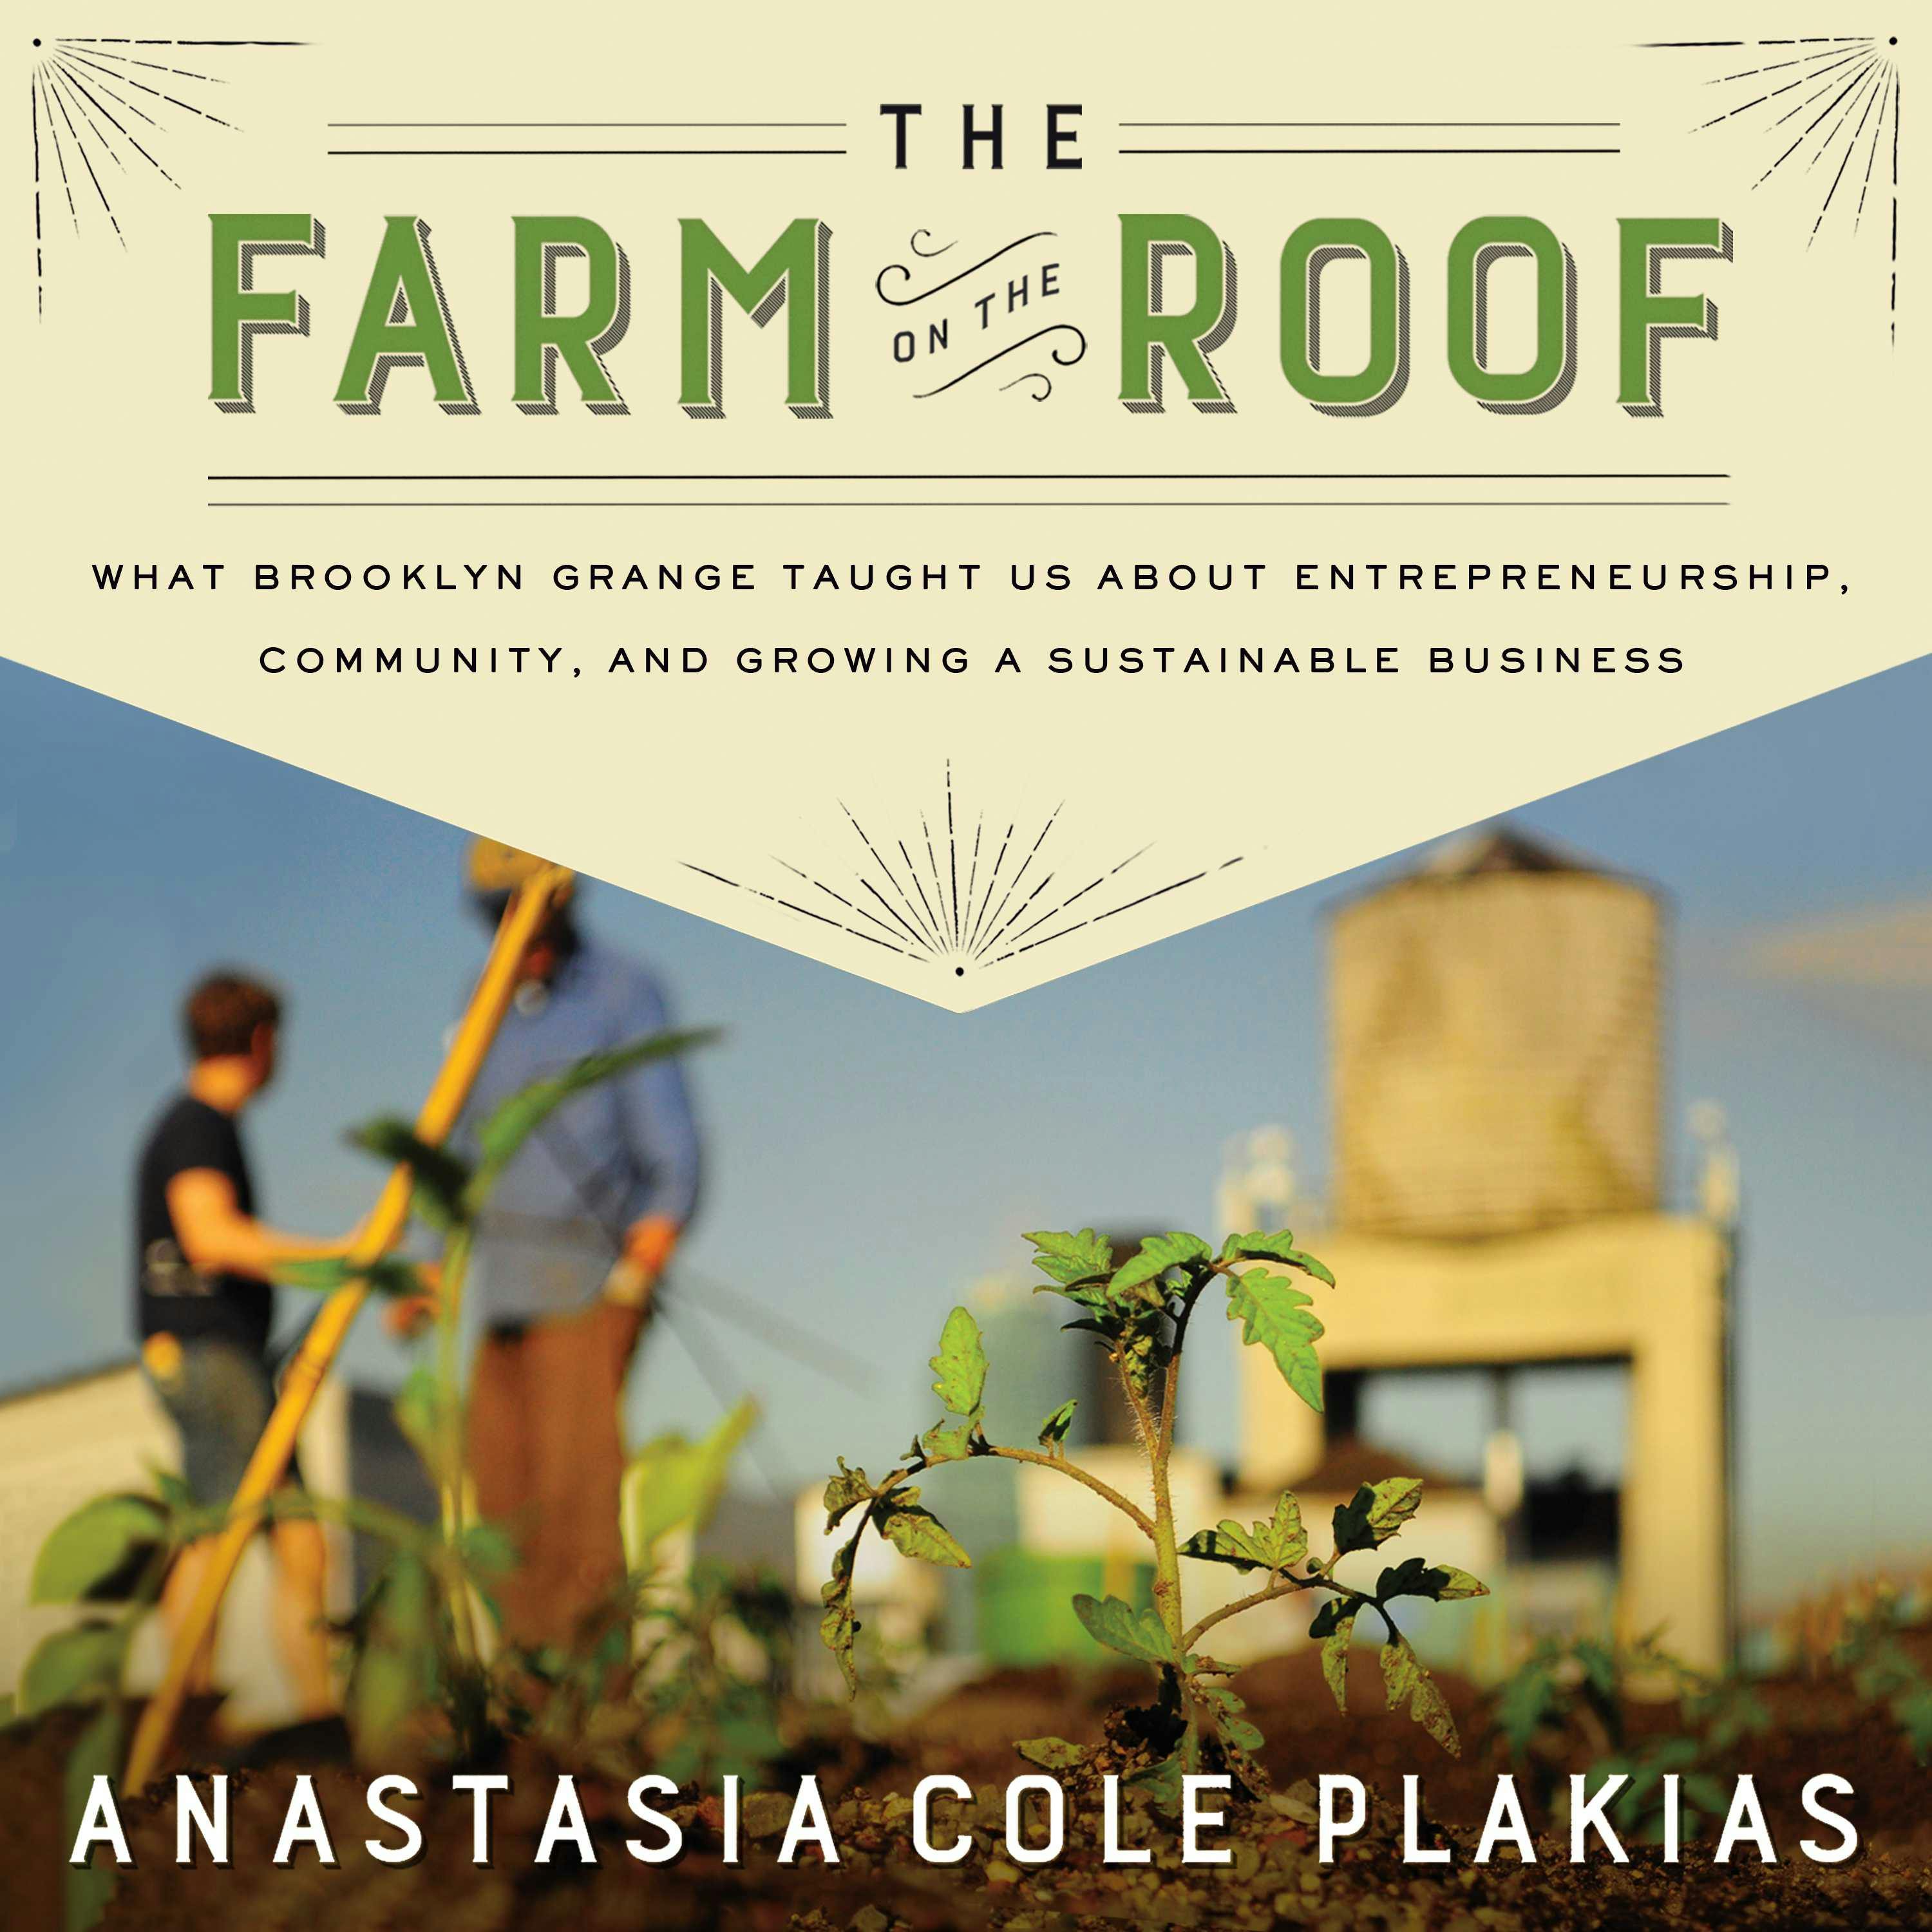 The Farm on the Roof: What Brooklyn Grange Taught Us About Entrepreneurship, Community, and Growing a Sustainable Business - Anastasia Cole Plakias